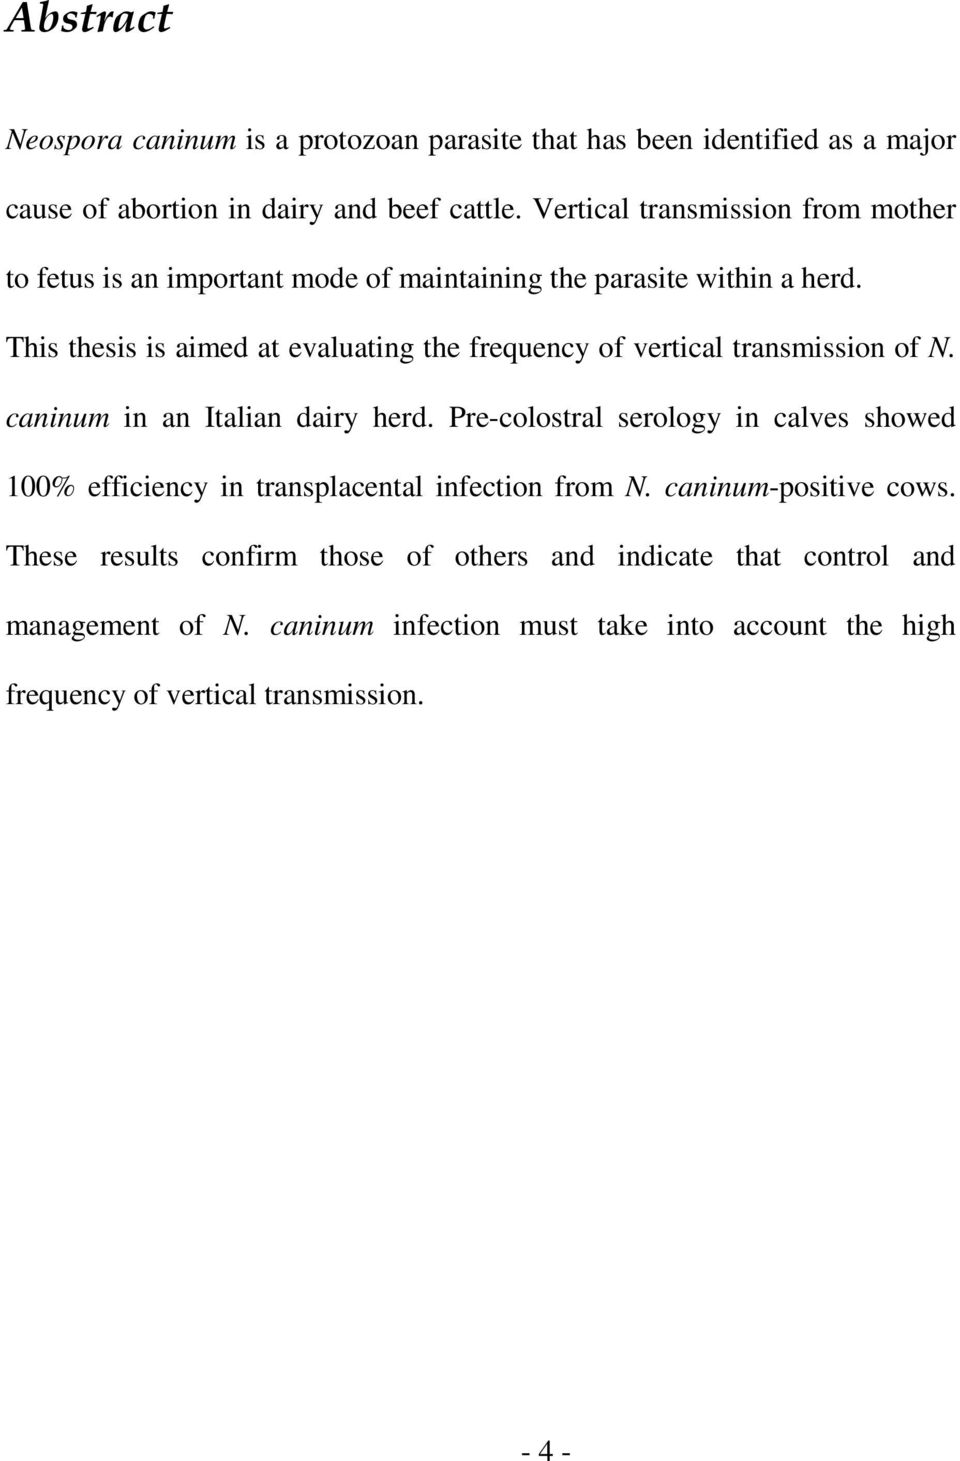 This thesis is aimed at evaluating the frequency of vertical transmission of N. caninum in an Italian dairy herd.